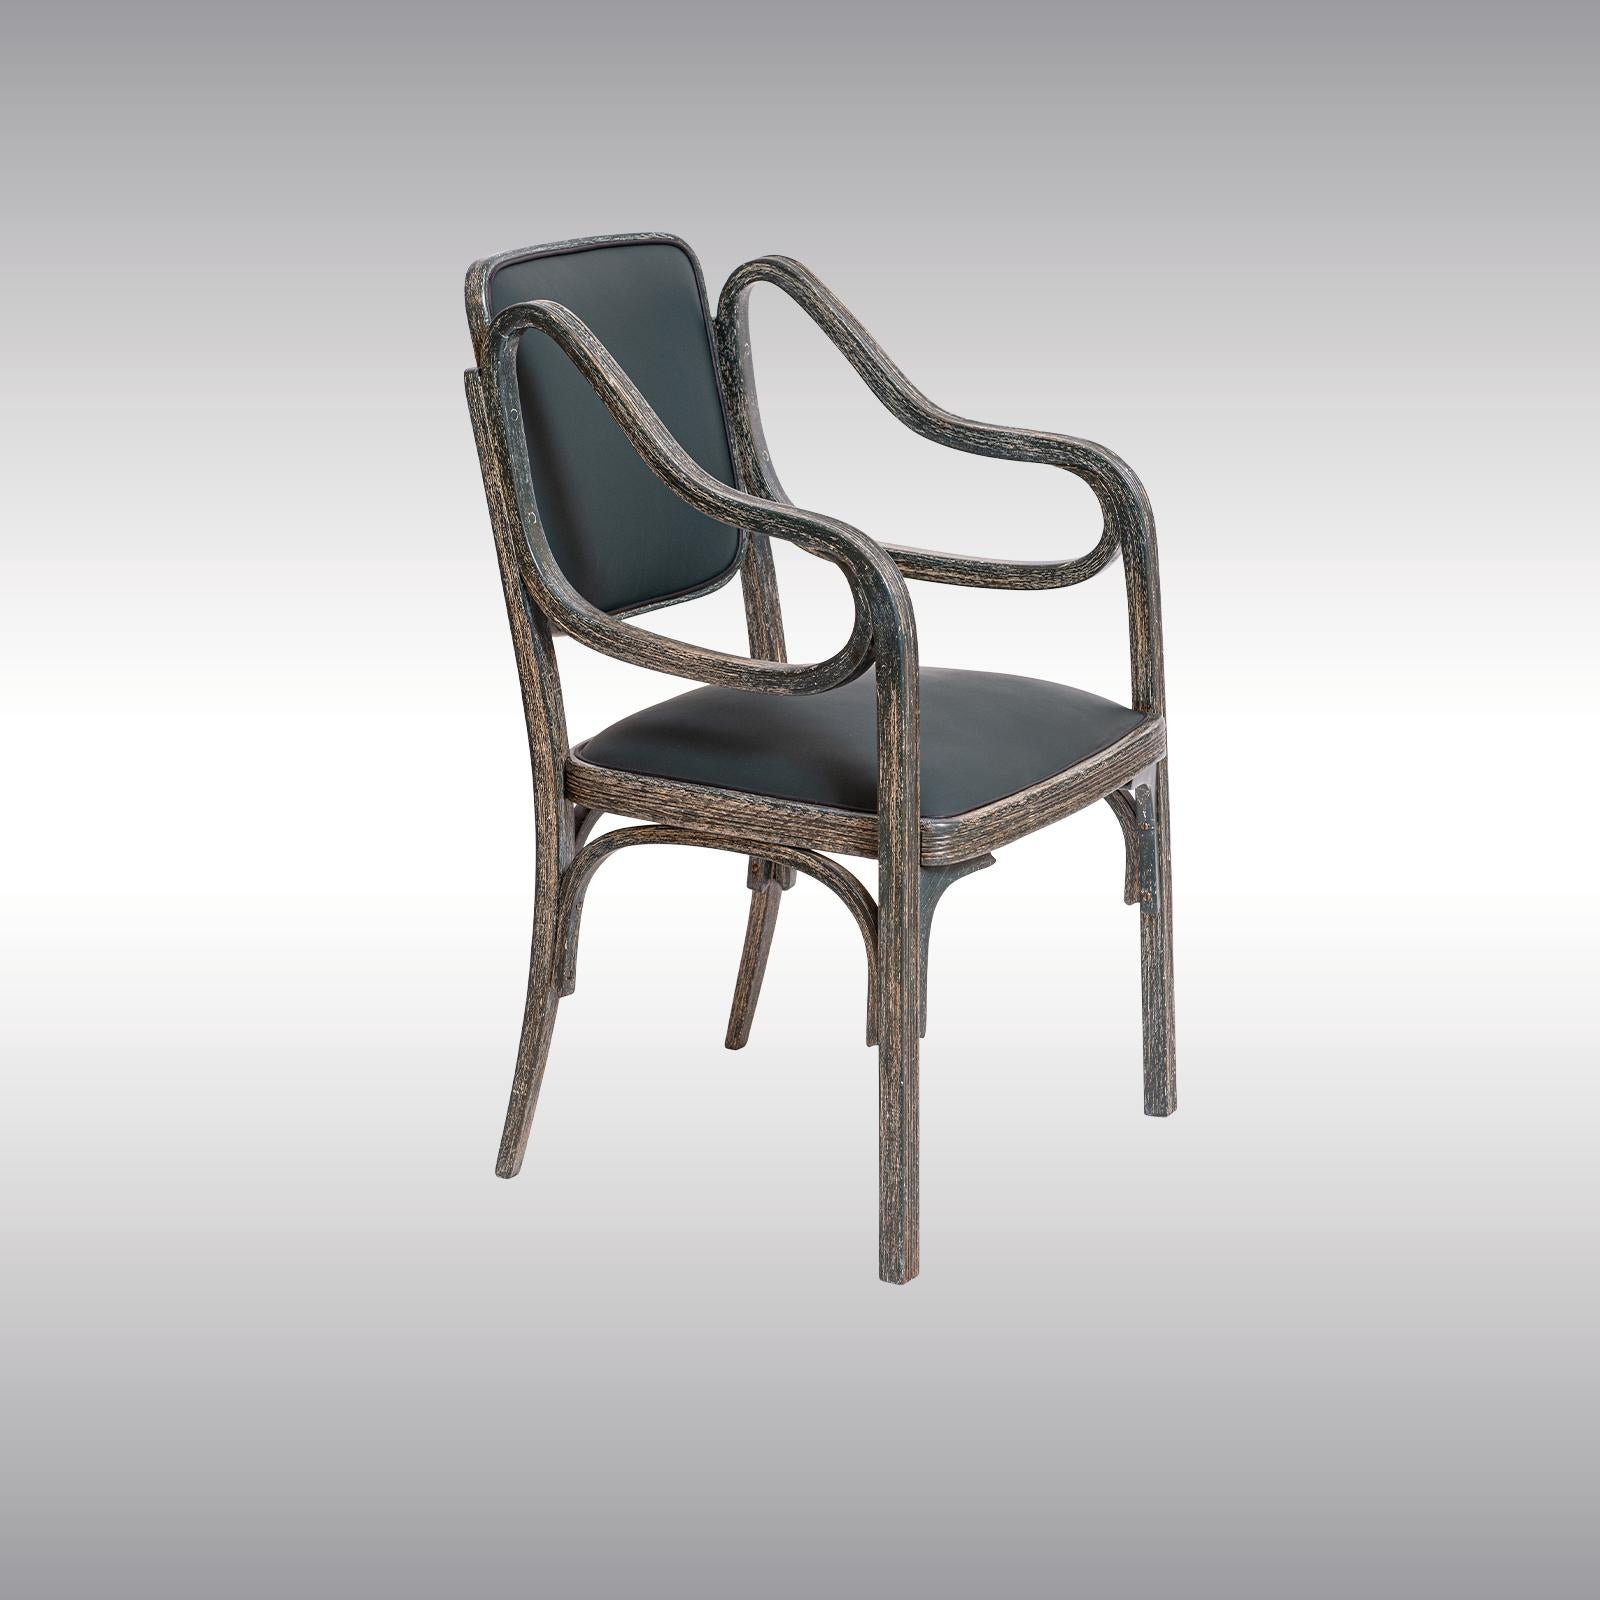 Hand-Crafted Original of Time Otto Wagner Armchair 1901 Jugendstil, Secession Style, 1901 For Sale